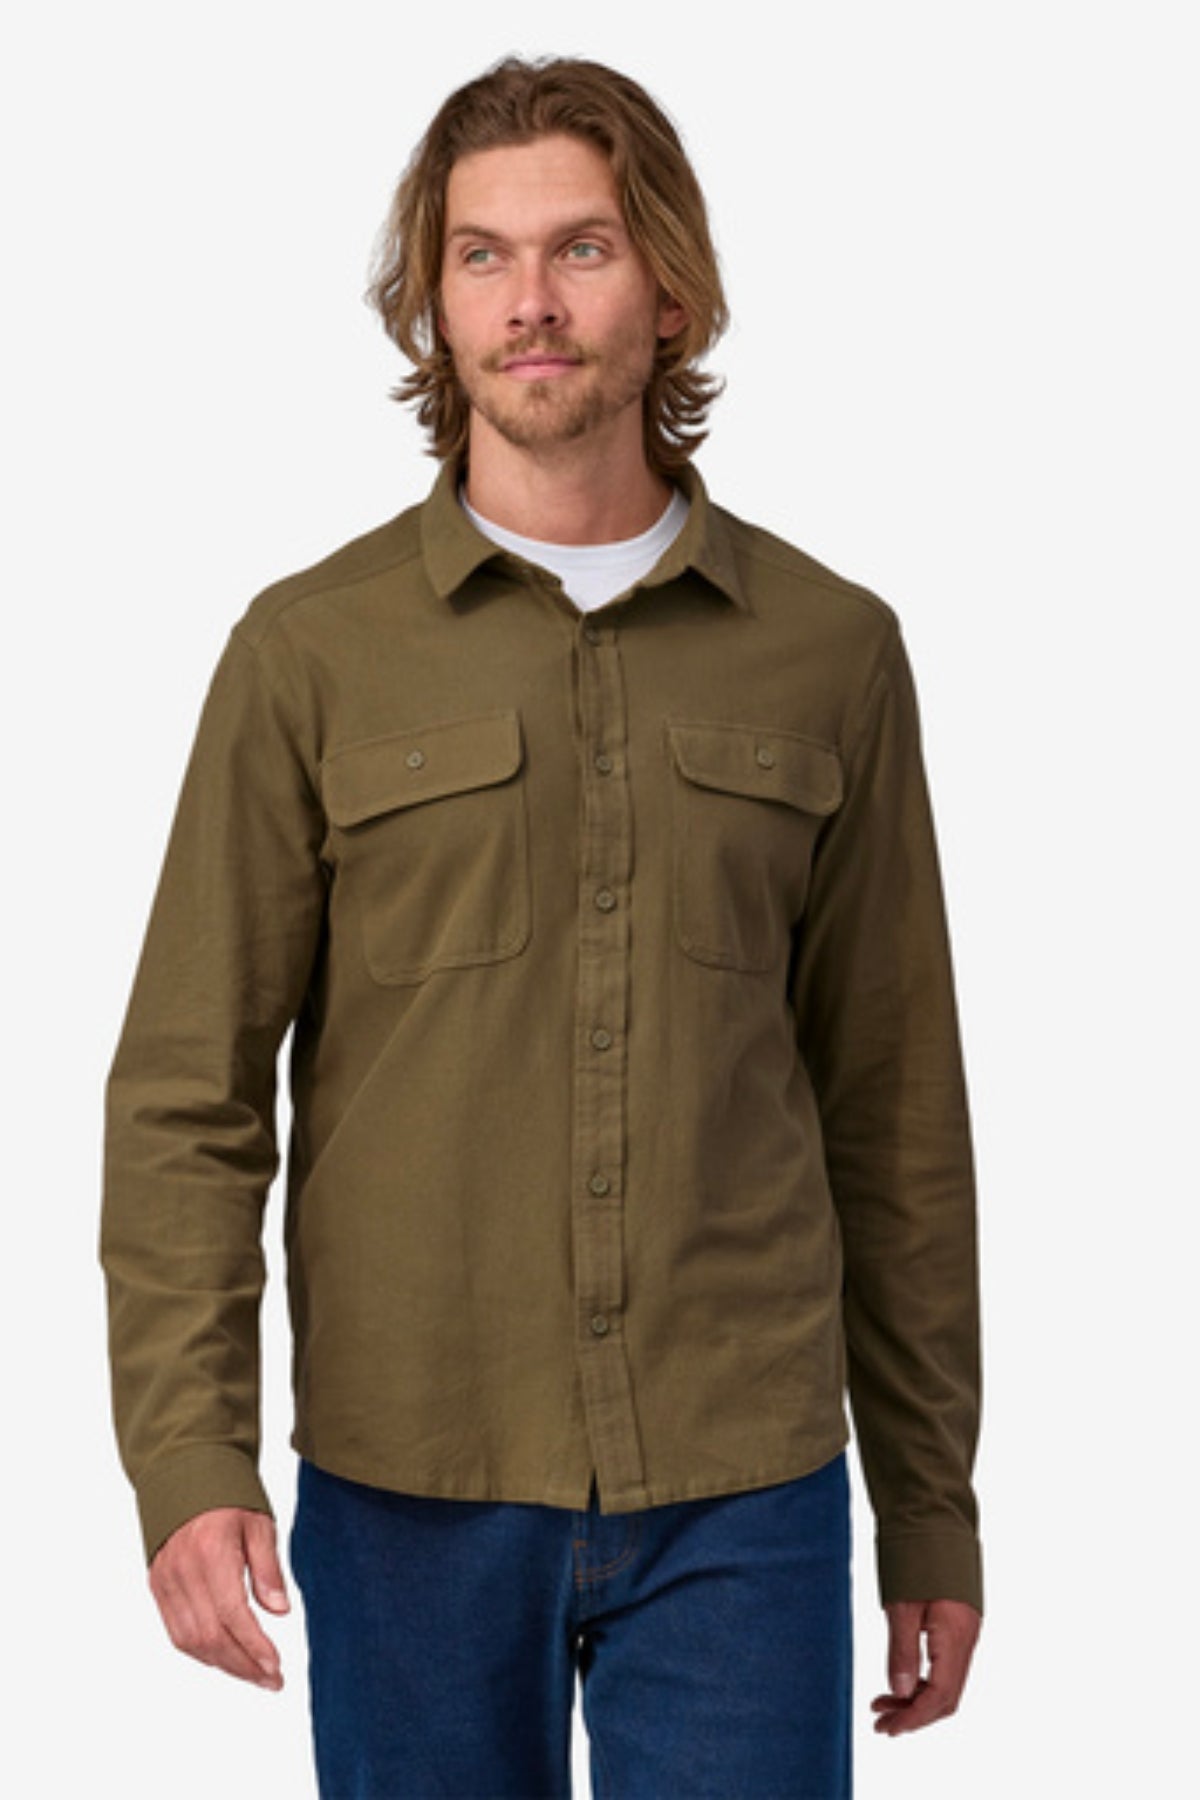 Sur chemise M's Knoven - Patagonia